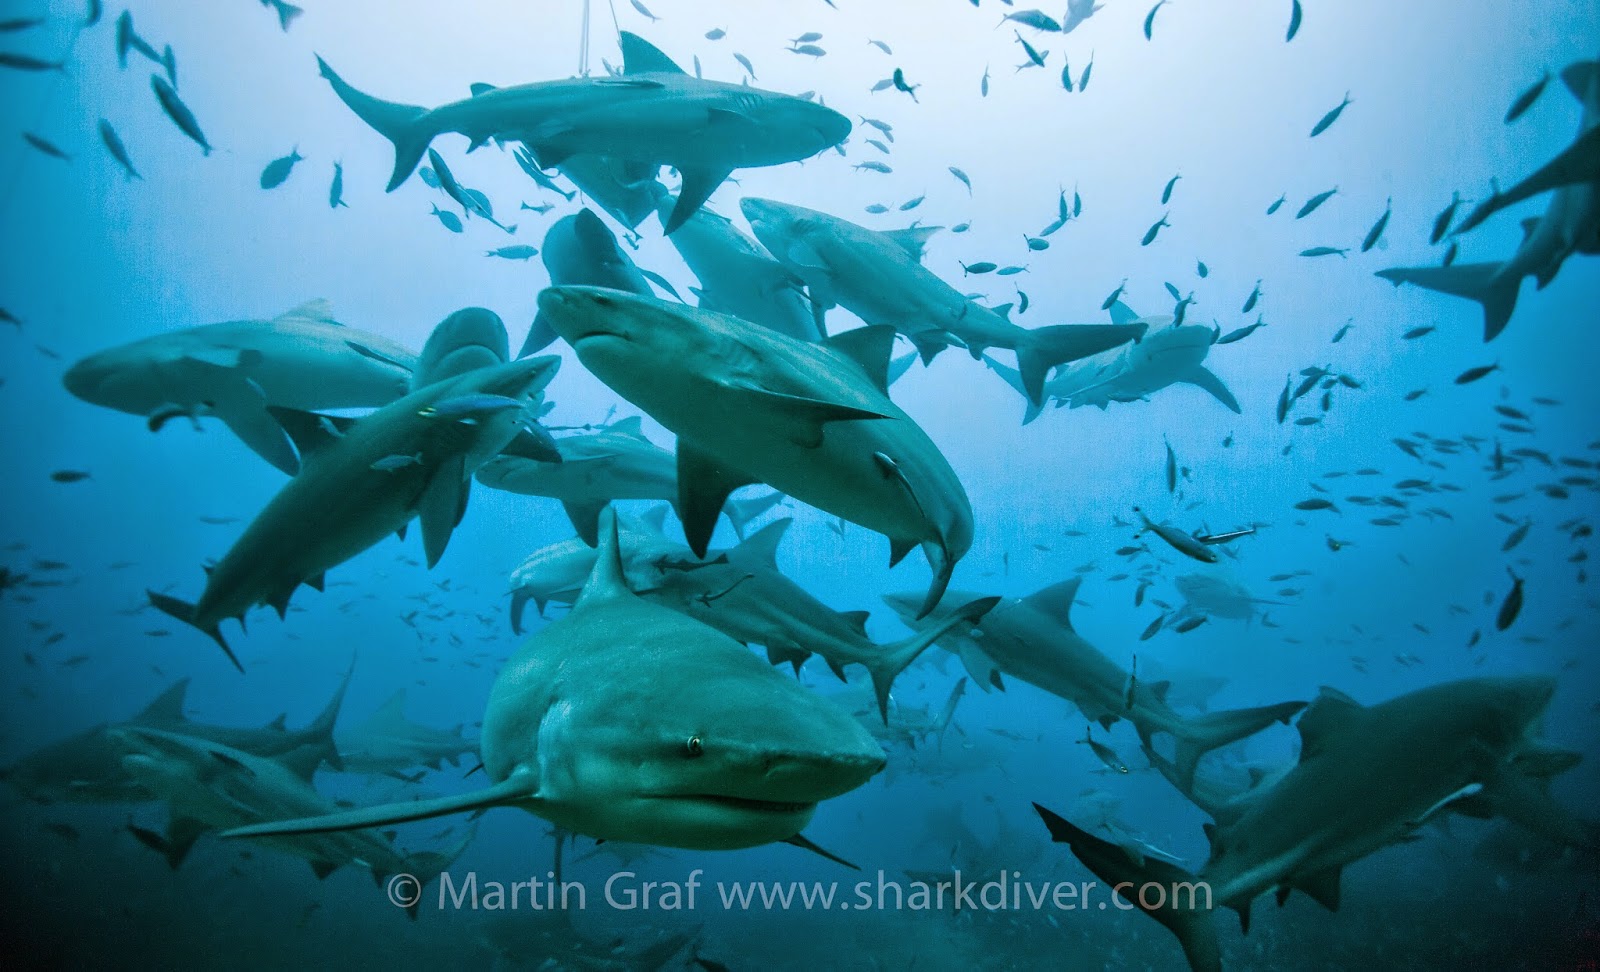 Shark Diver : Shark Diving : Swimming With Sharks: If you love sharks